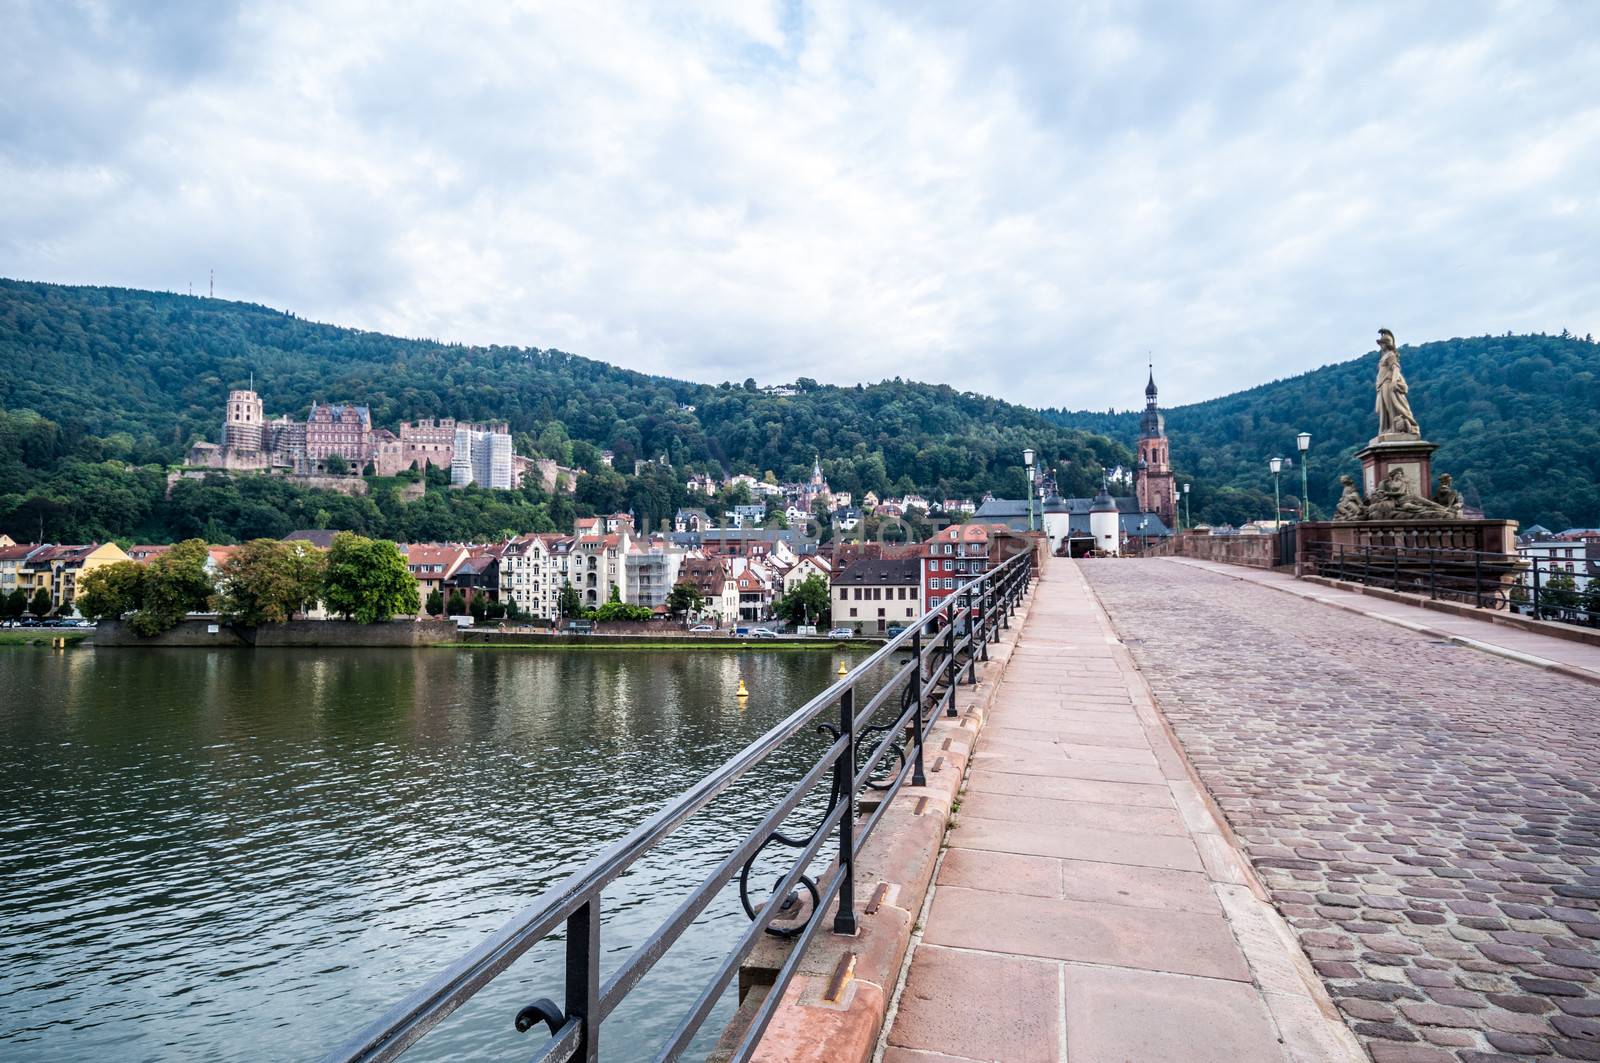 view of the old town of Heidelberg with the castle